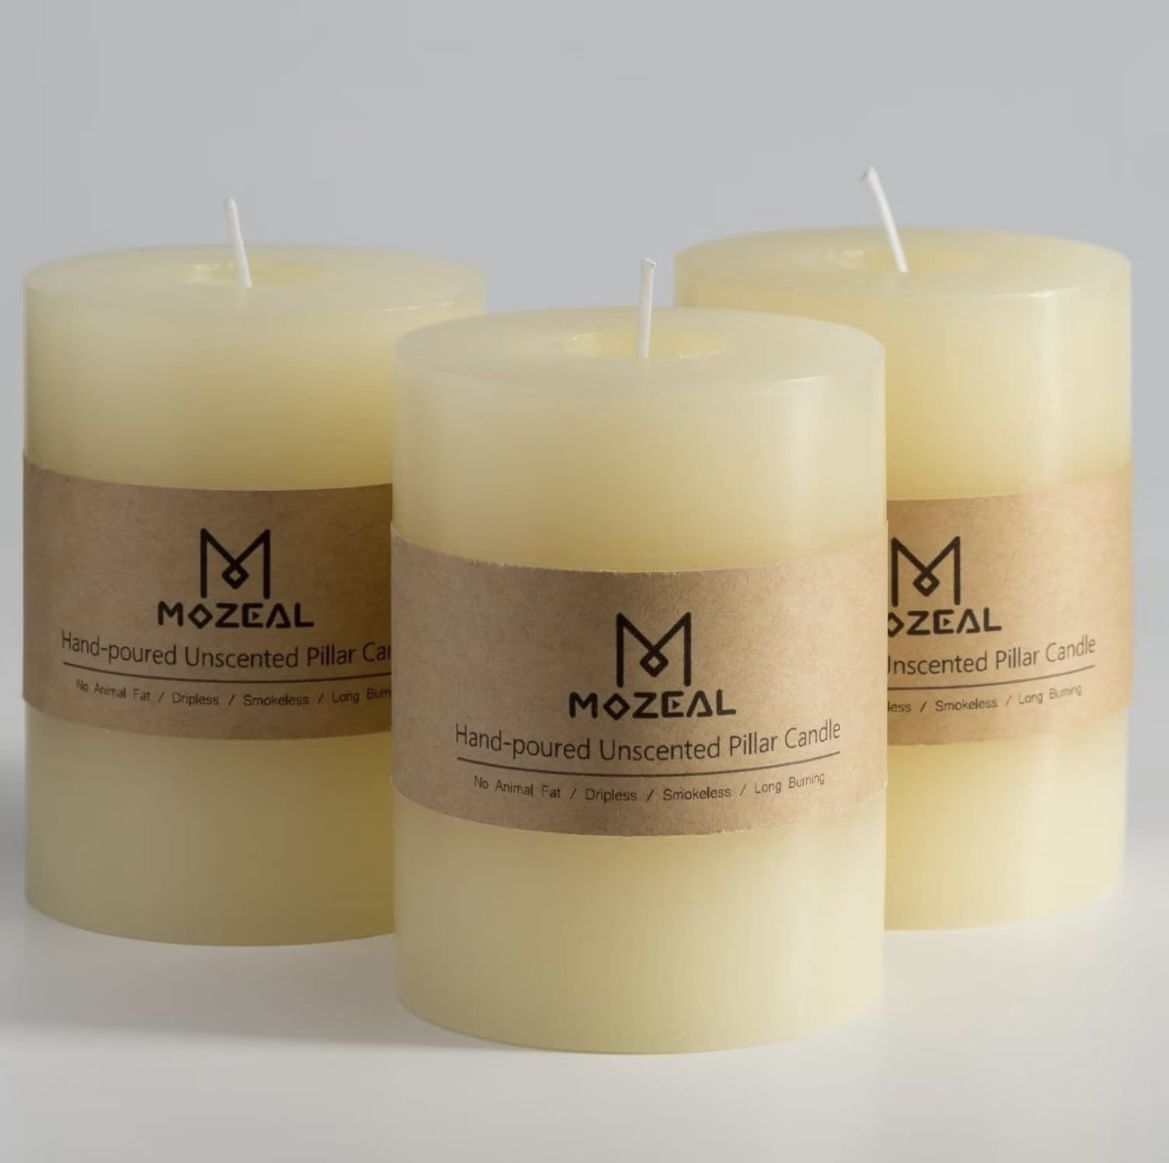 MOZEAL 3" x 4" Hand-Poured Unscented Candle,Dripless Pillar Candle Set of 3,Long Clean Burning,Approx 72 Hours Burn Time,Rustic Country Style,Wedding,